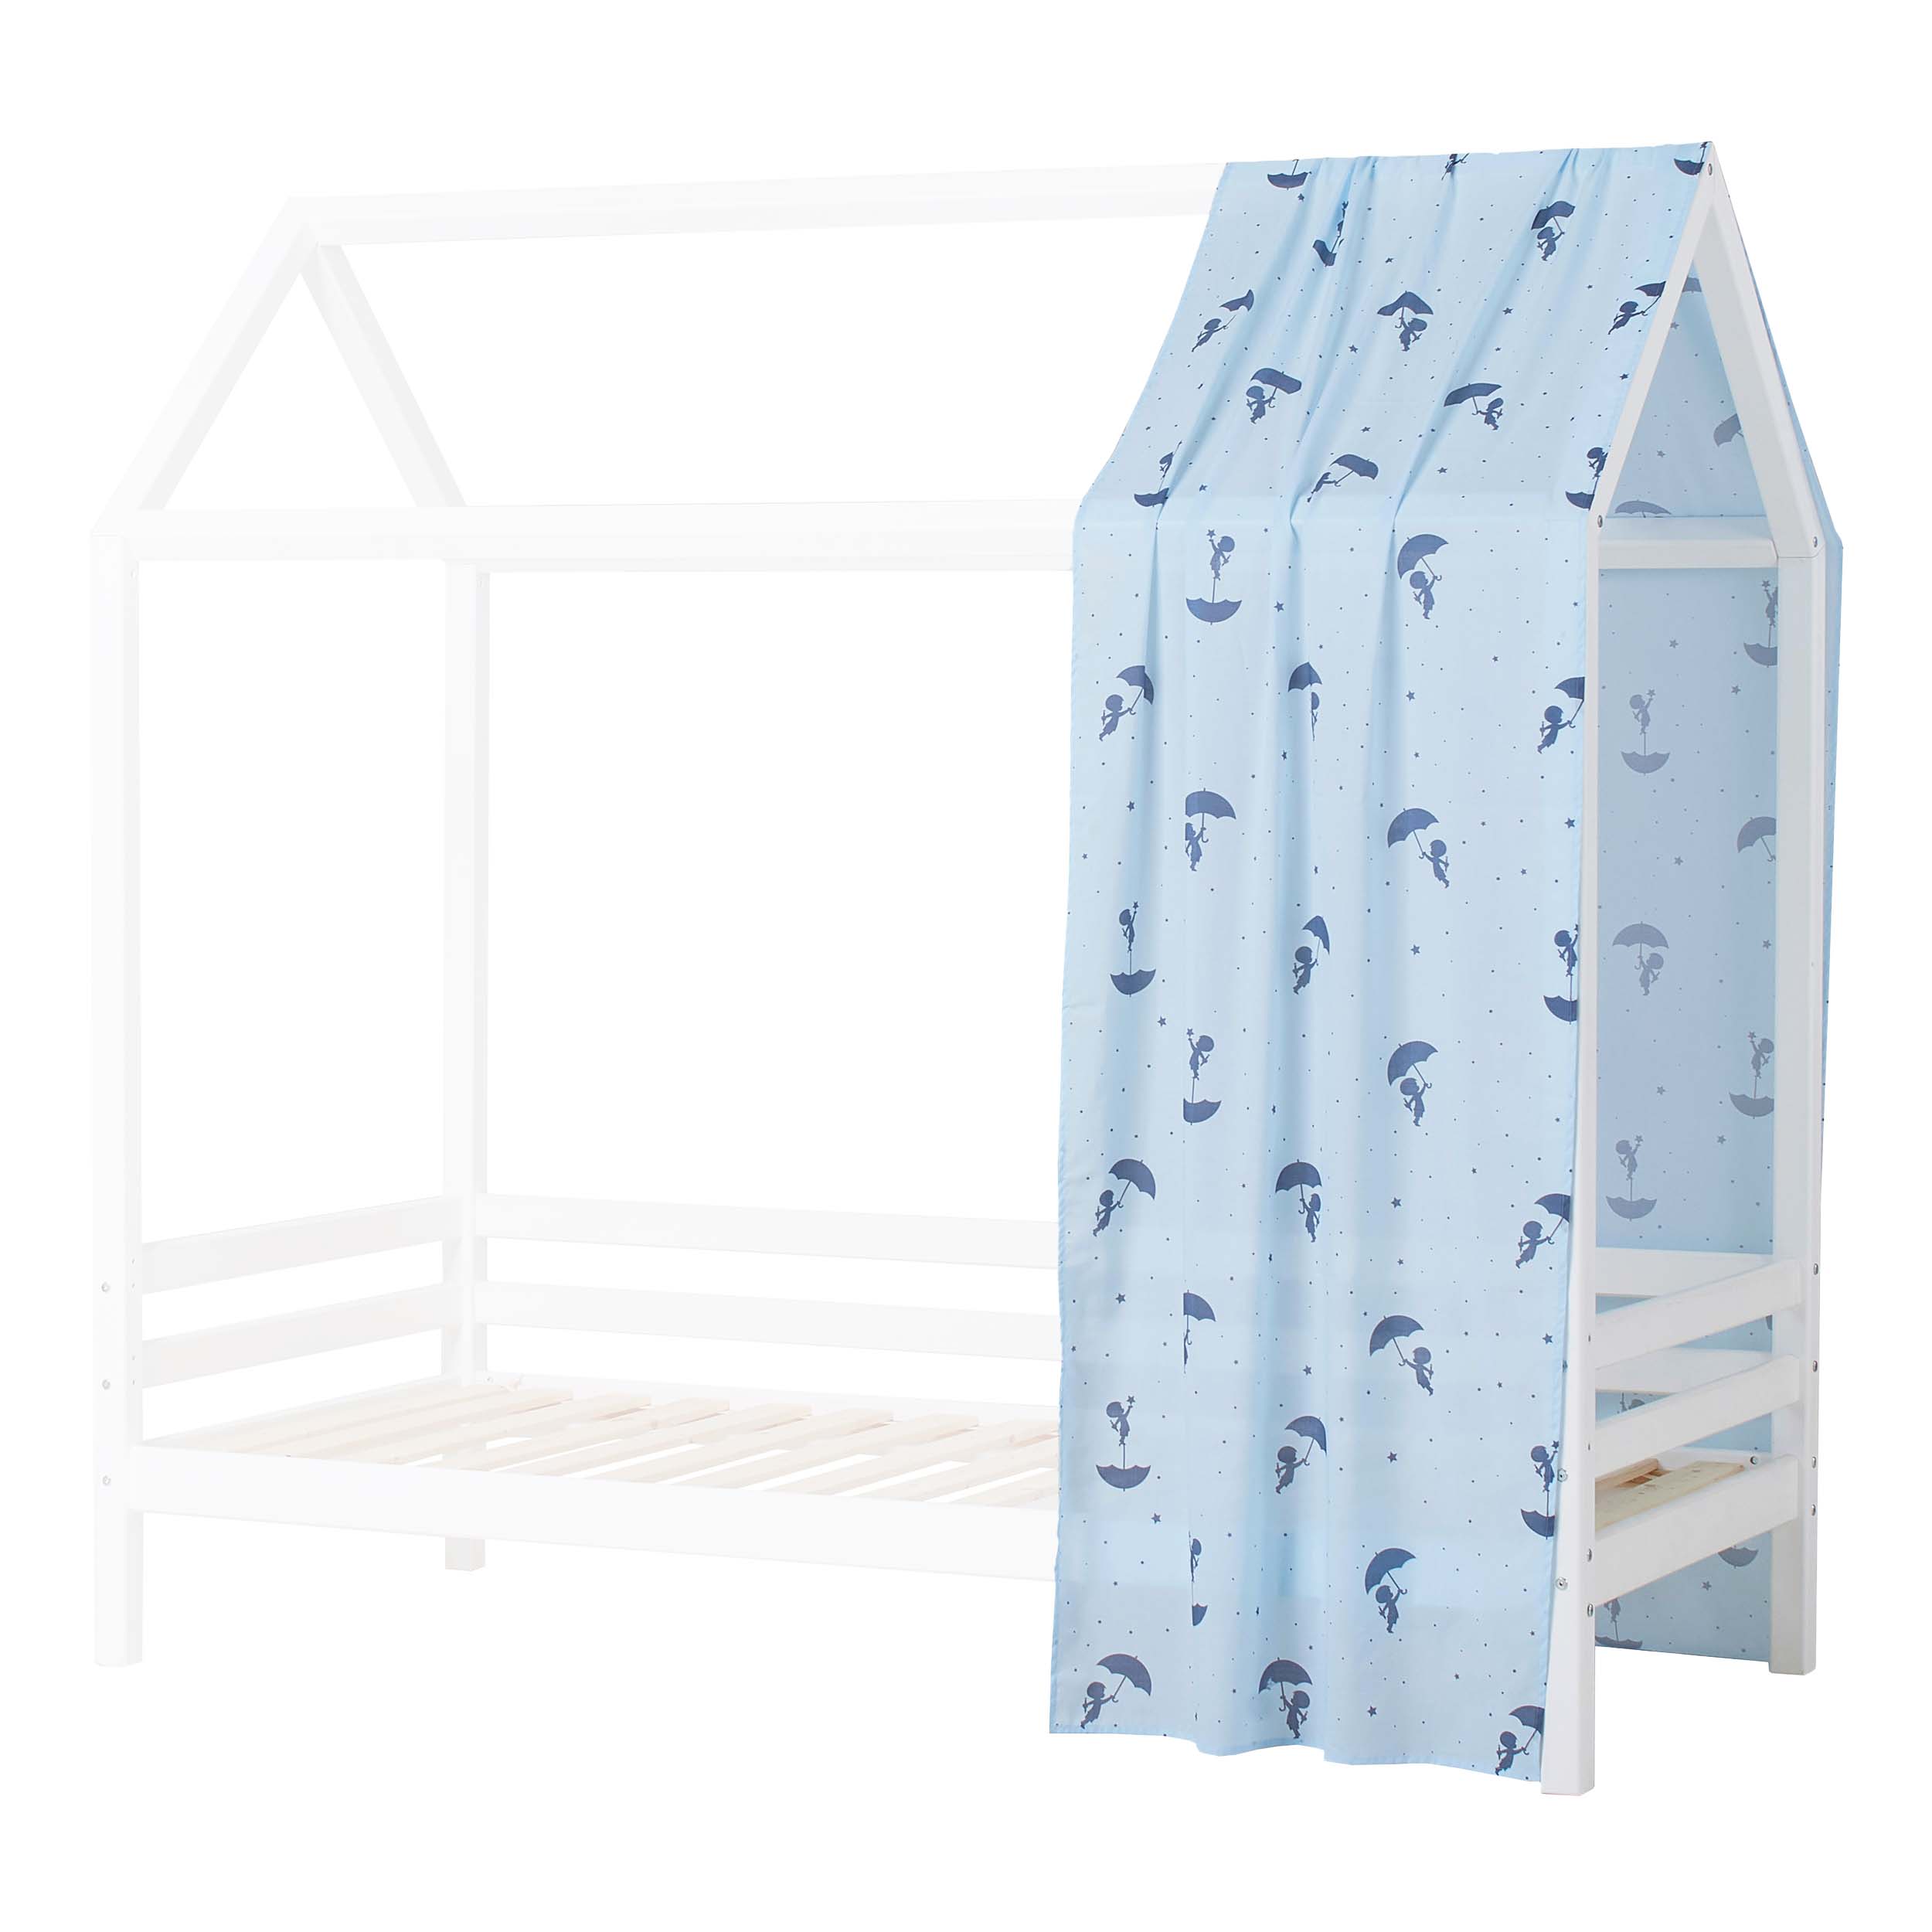 Hoppekids Ole Lukoie Bed Curtain for House Bed, Blue